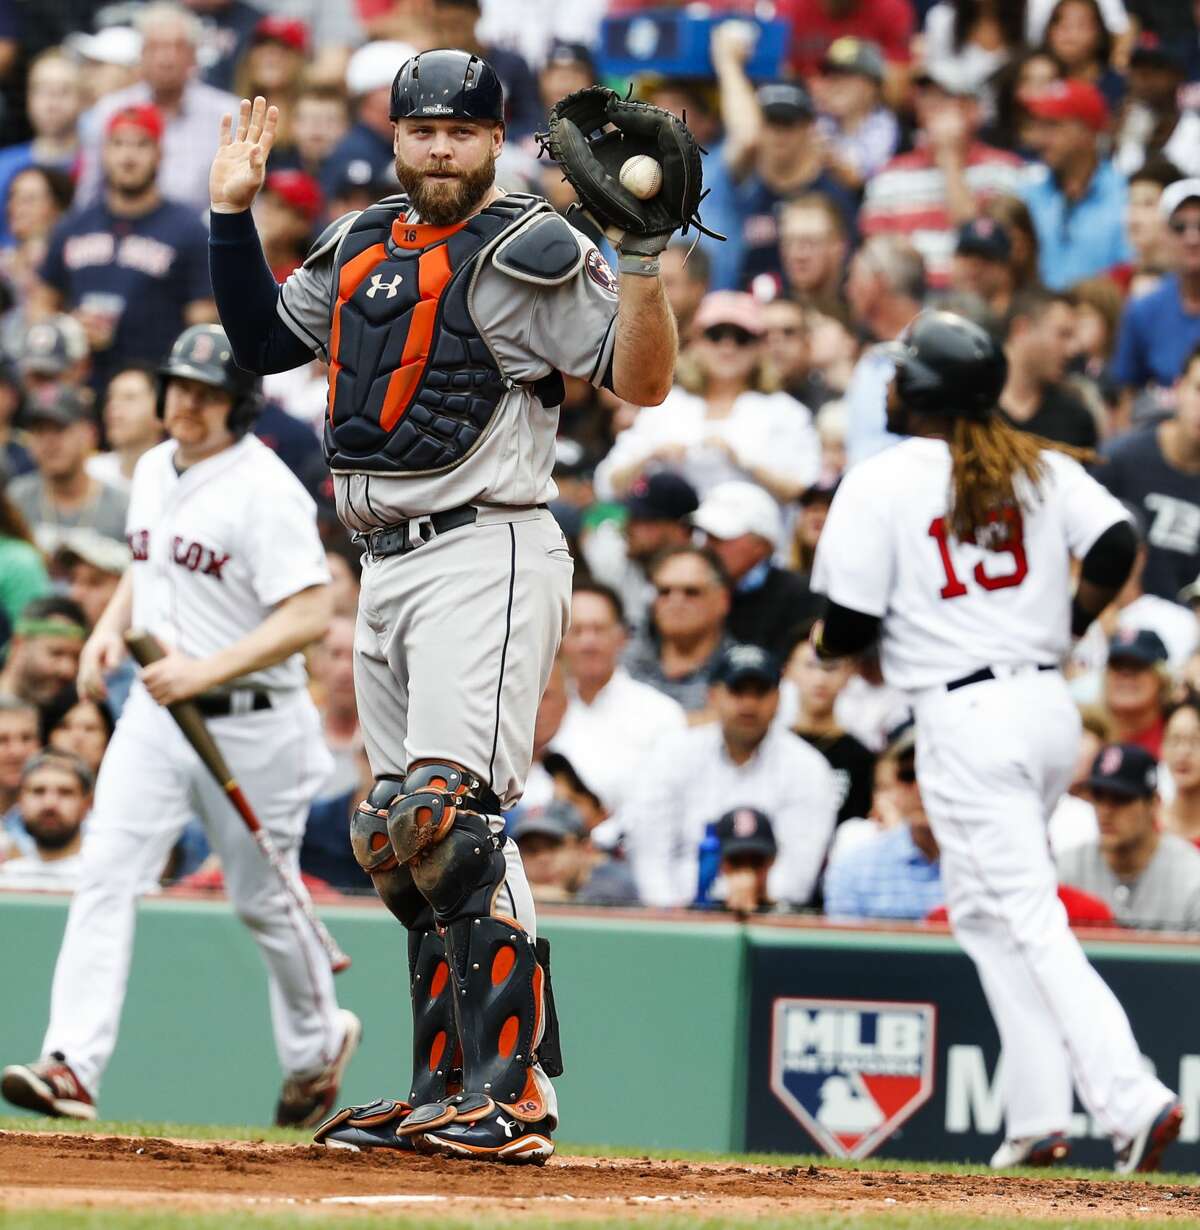 Houston Astros catcher Brian McCann calls time after forcing out Boston Red Sox designated hitter Hanley Ramirez (13) at home on a grounder by Boston Red Sox shortstop Xander Bogaerts during the second inning of the ALDS Game 3 at Fenway Park, Sunday, Oct. 8, 2017, in Boston . ( Karen Warren / Houston Chronicle )